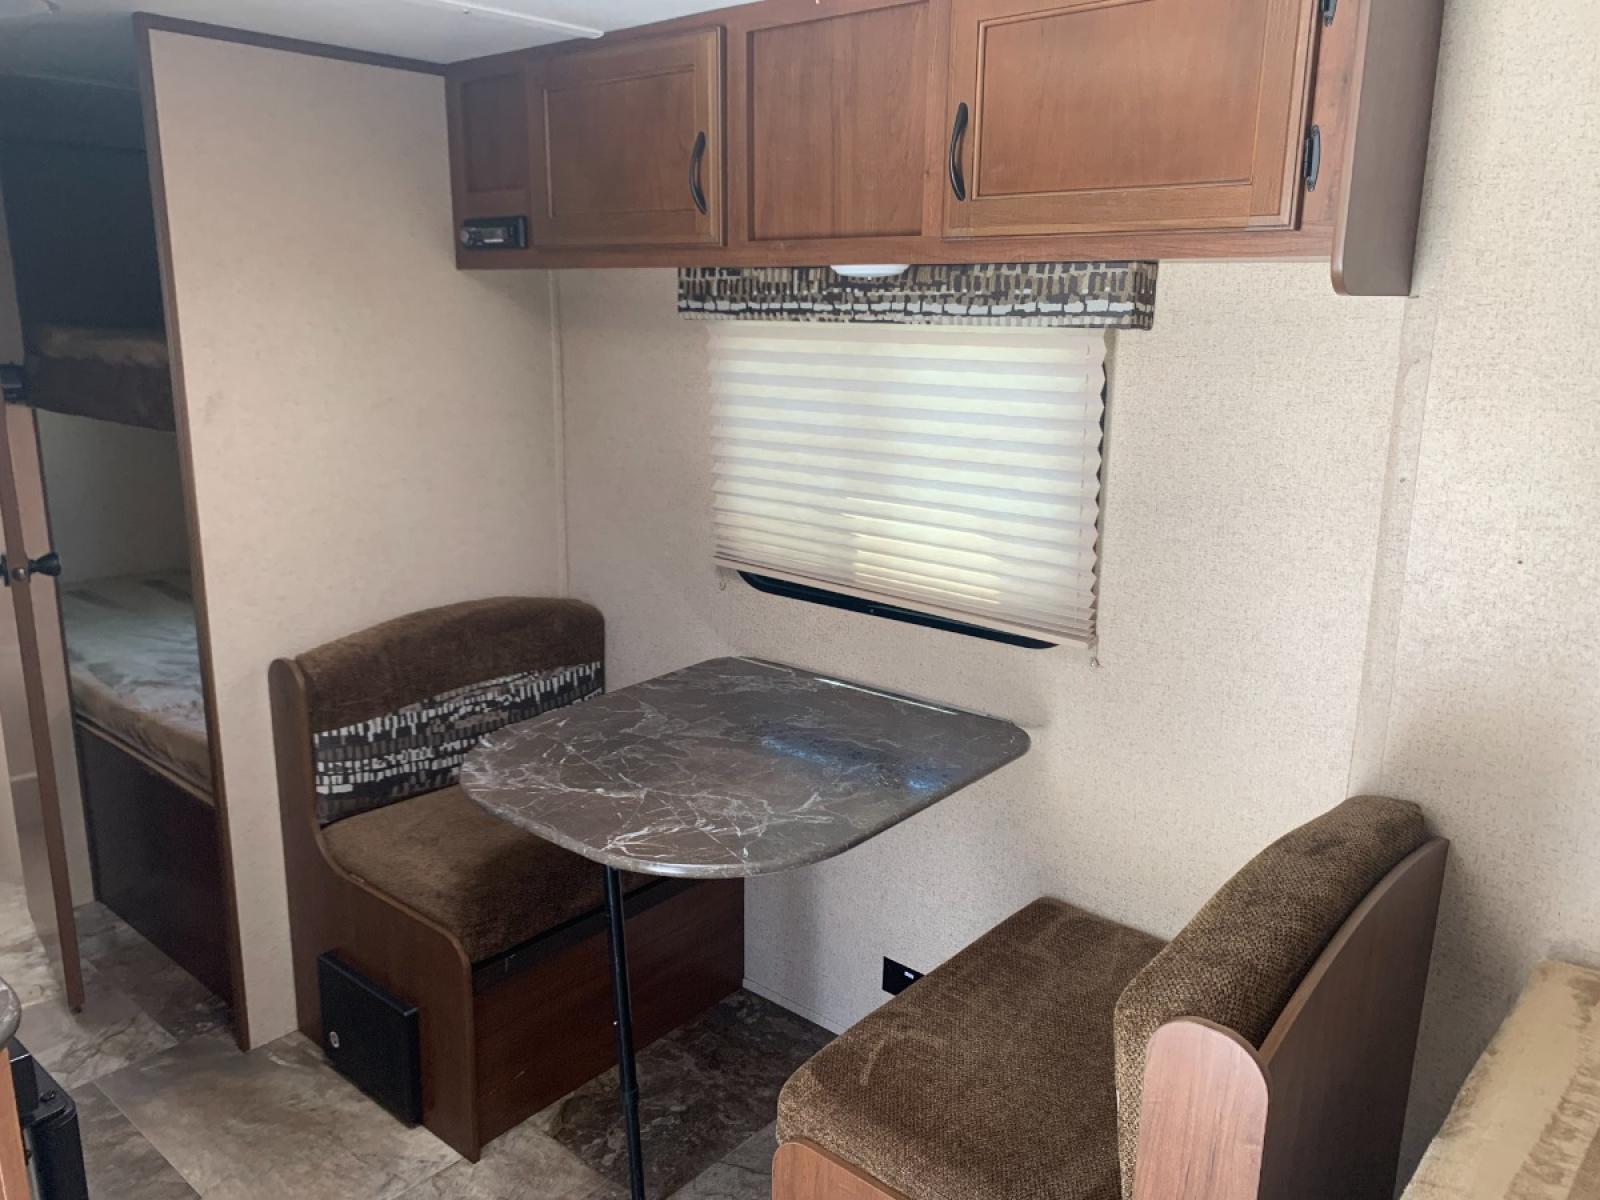 2016 TAN JAYCO Unknown 174BH (1UJBJ0AJ9G1) , located at 17760 Hwy 62, Morris, OK, 74445, 35.609104, -95.877060 - 2016 JAYCO JAY FLIGHT SLX 174BH IS 21.5FT LONG. THE OUTSIDE FEATURES A 10FT POWER AWNING, OUTSIDE STORAGE, OUTSIDE SPEAKERS, SINGLE AXLE, REAR MANUAL LEVELING JACKS, AND SPARE TIRE. AS YOU ENTER THE CAMPER, YOU WILL NOTICE THAT THERE ARE 5 WINDOWS SO YOU CAN LET NATURAL SUNLIGHT IN, THE QUEEN BE - Photo #11